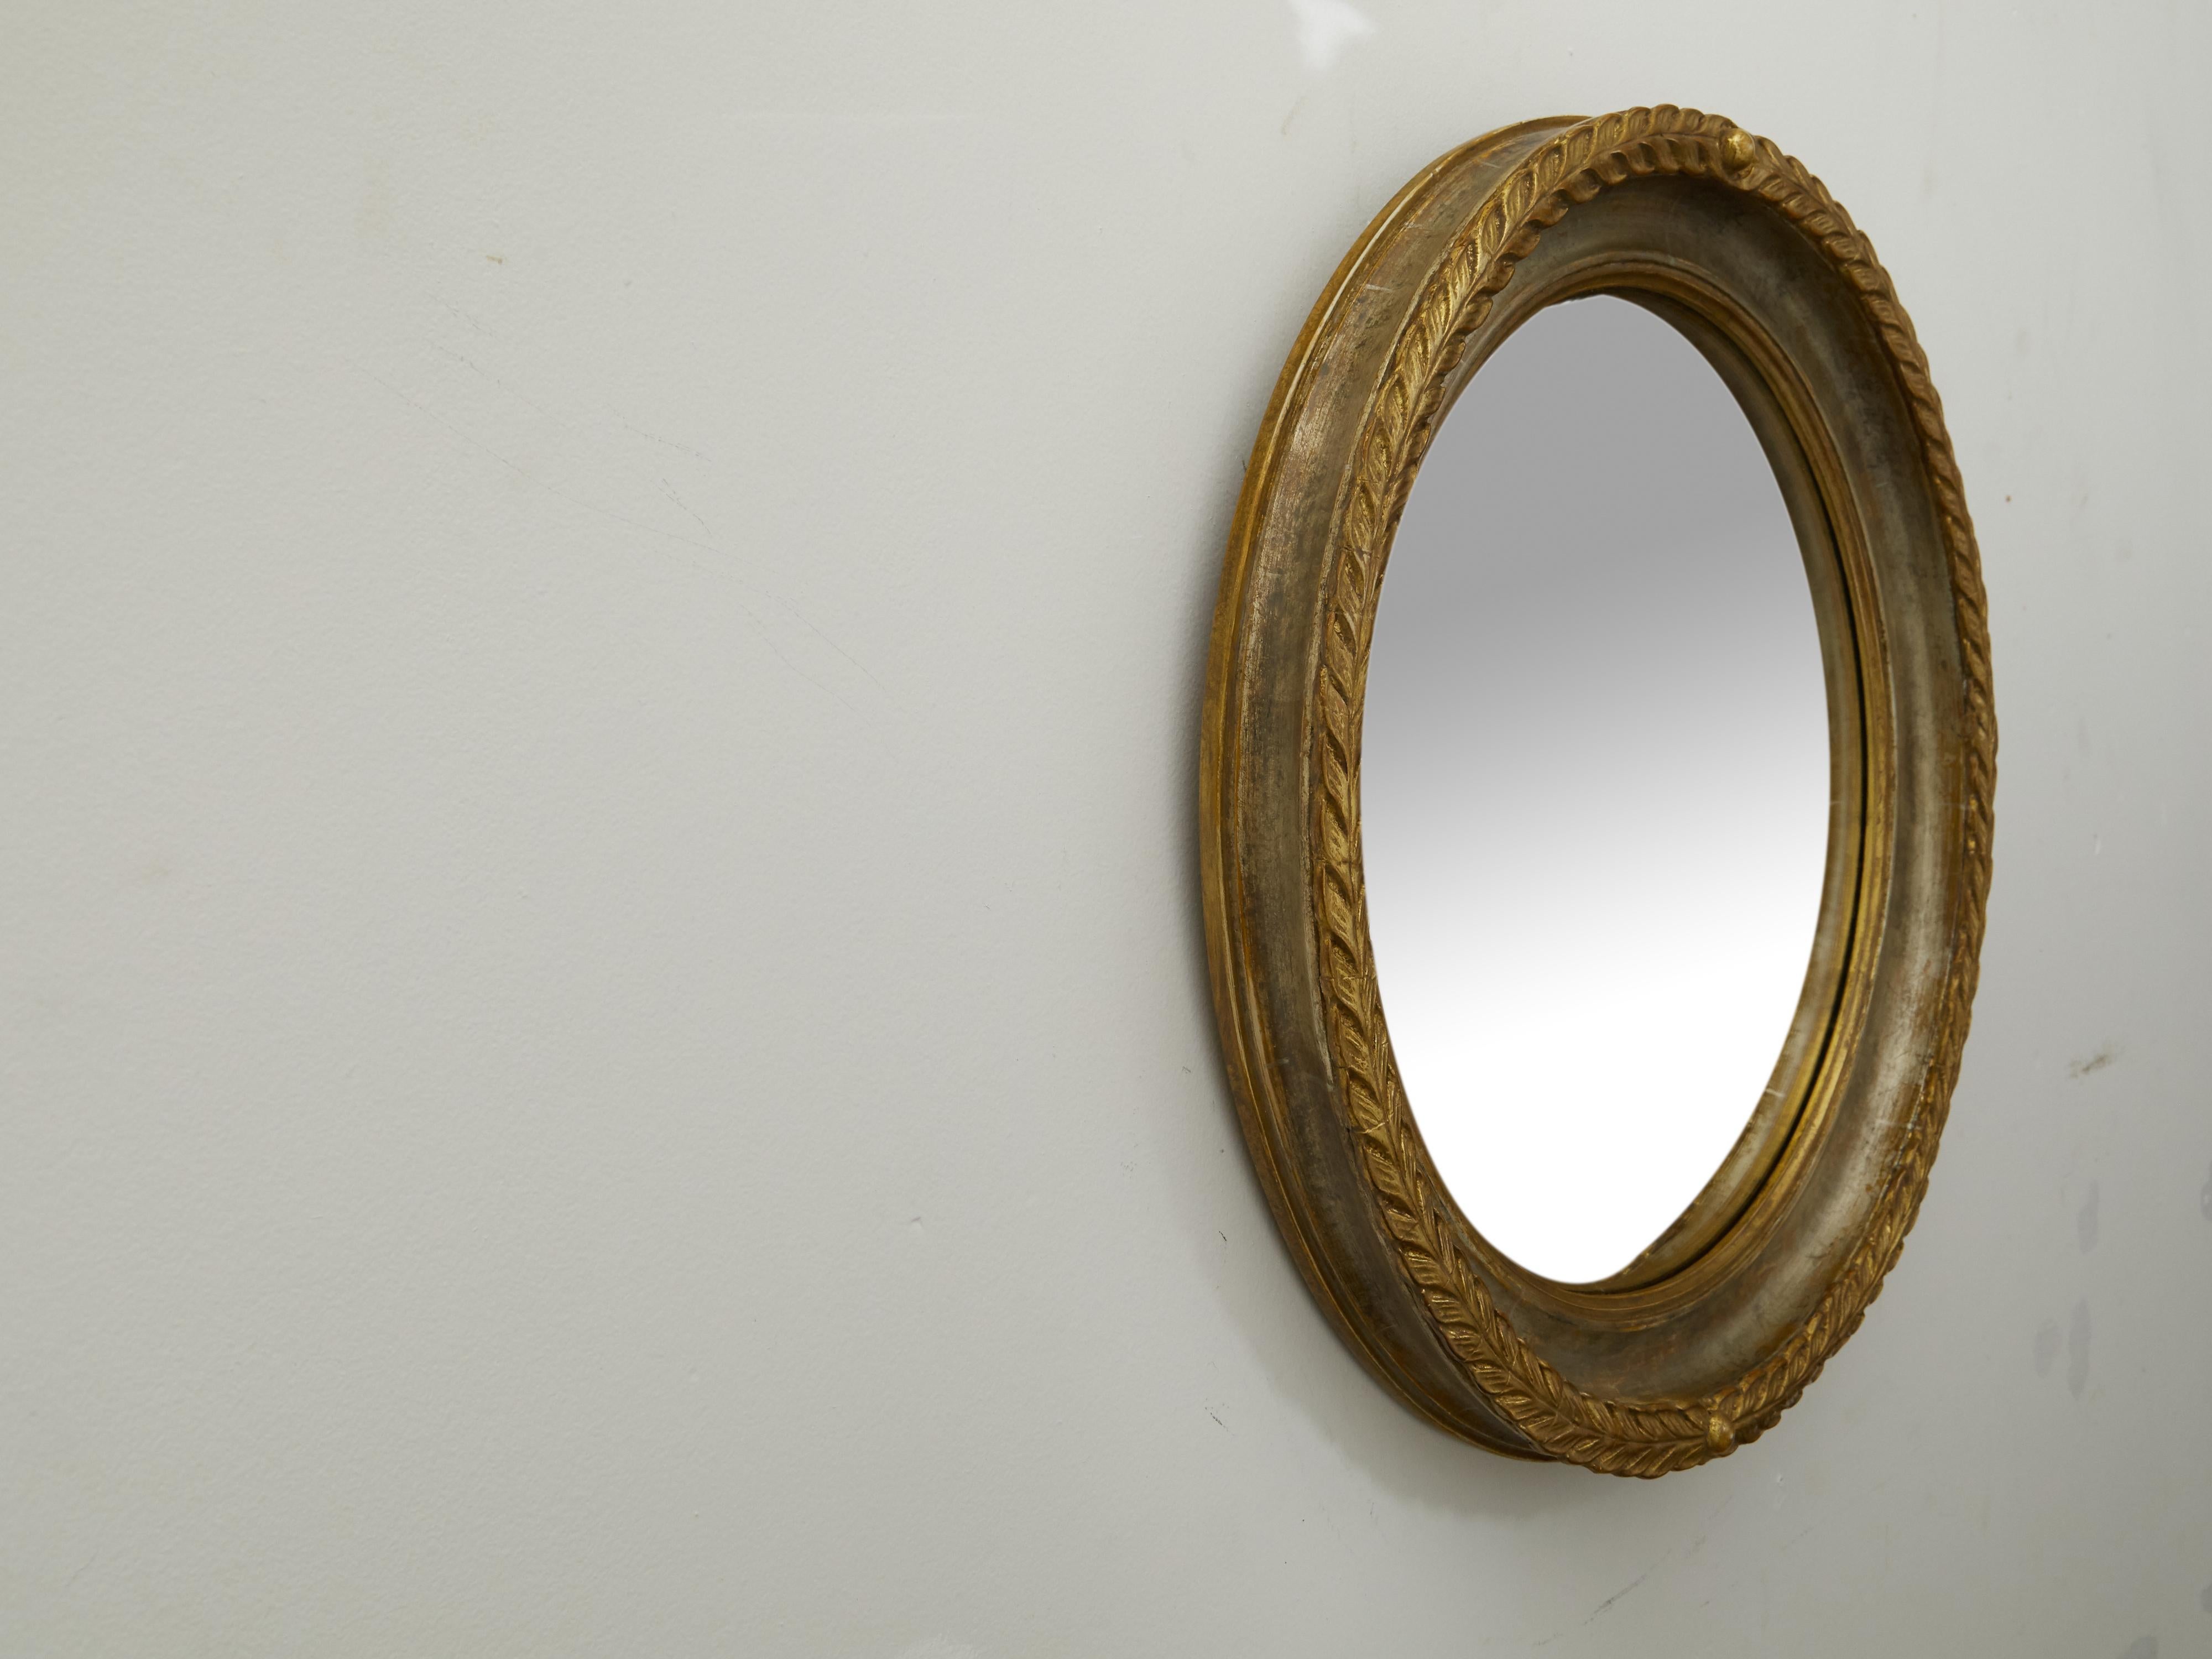 English 1920s-1930s Carved Wooden Round Mirror with Gilt Accents and Foliage 4